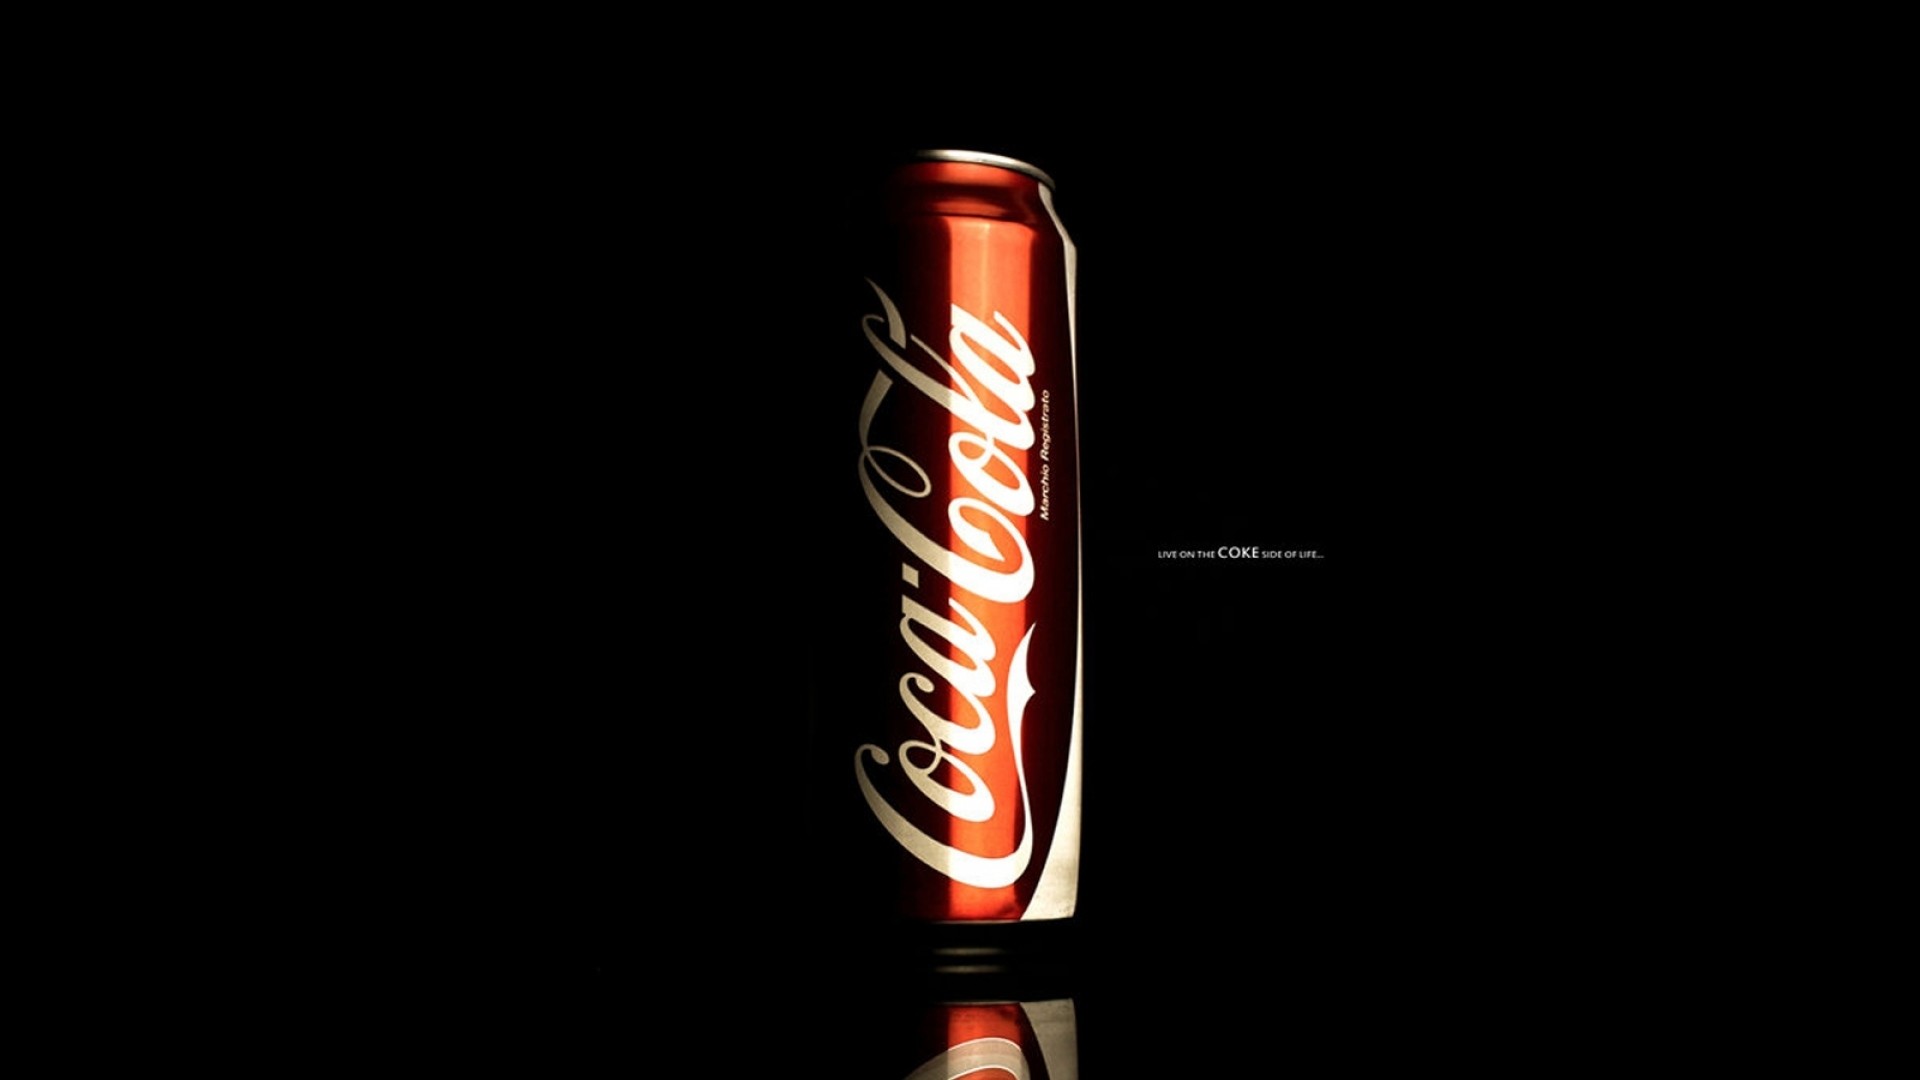 1920x1080 70 HD Coca Cola Wallpapers and Backgrounds - Fun Peep